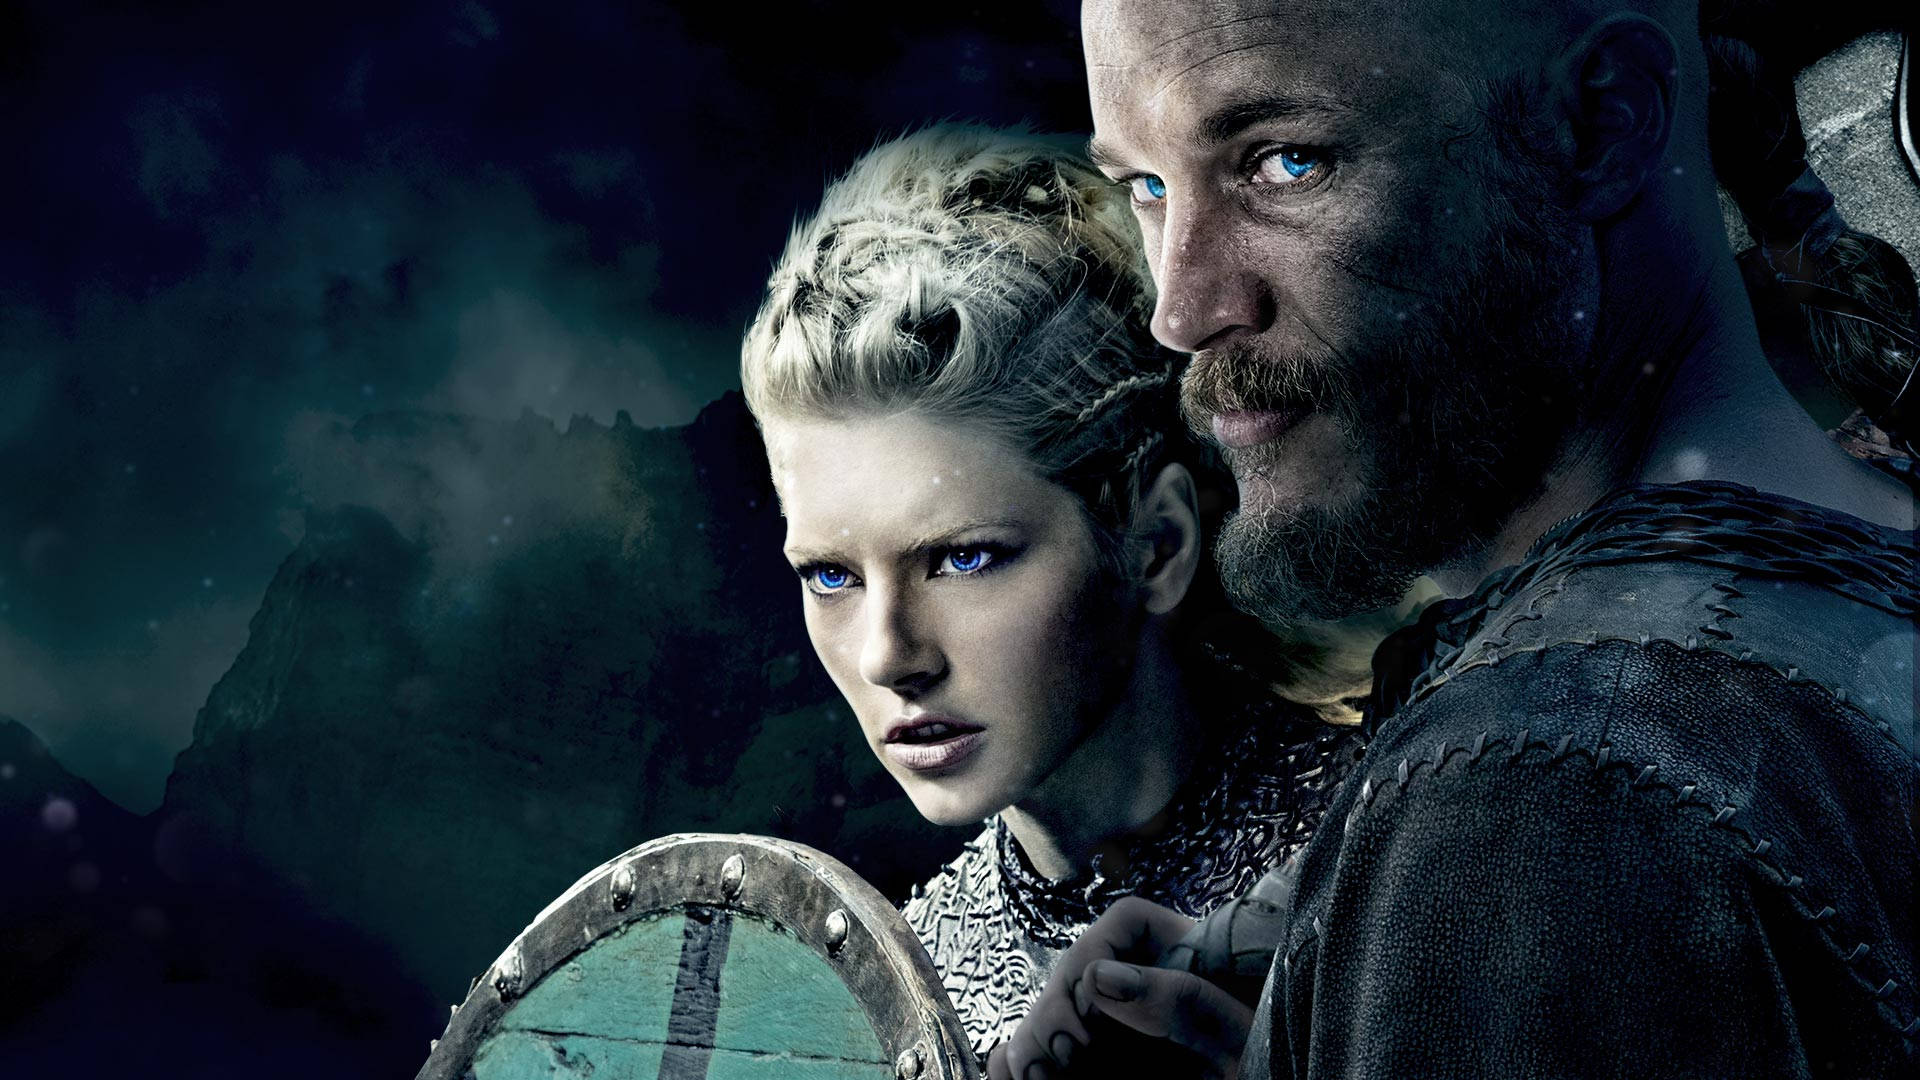 Historienvisar Vikings Lagertha Och Ragnar. (this Sentence Can Be Used On A Computer Or Mobile Wallpaper Featuring A Historical Or Viking Theme With Images Of Lagertha And Ragnar.) Wallpaper